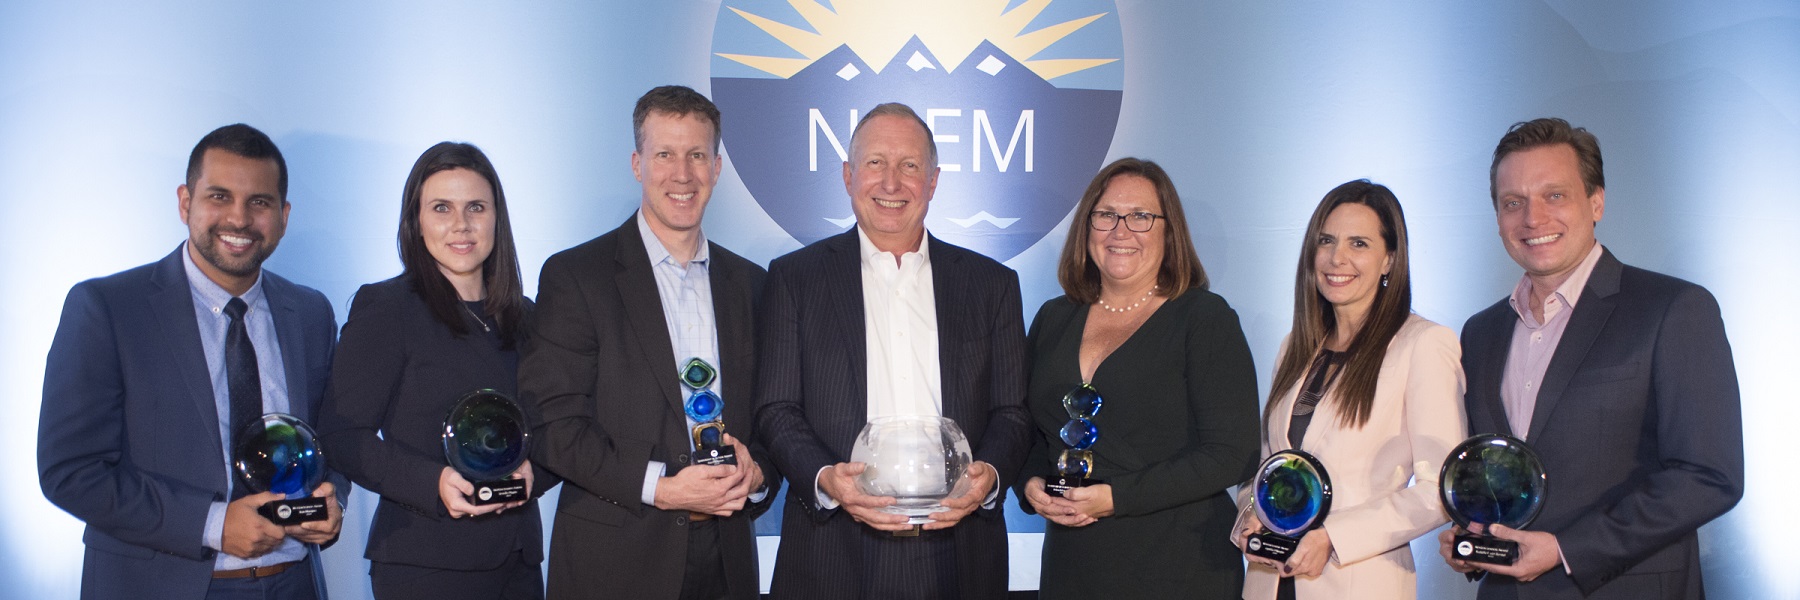 NAEM Excellence Awards - 2019 Winners